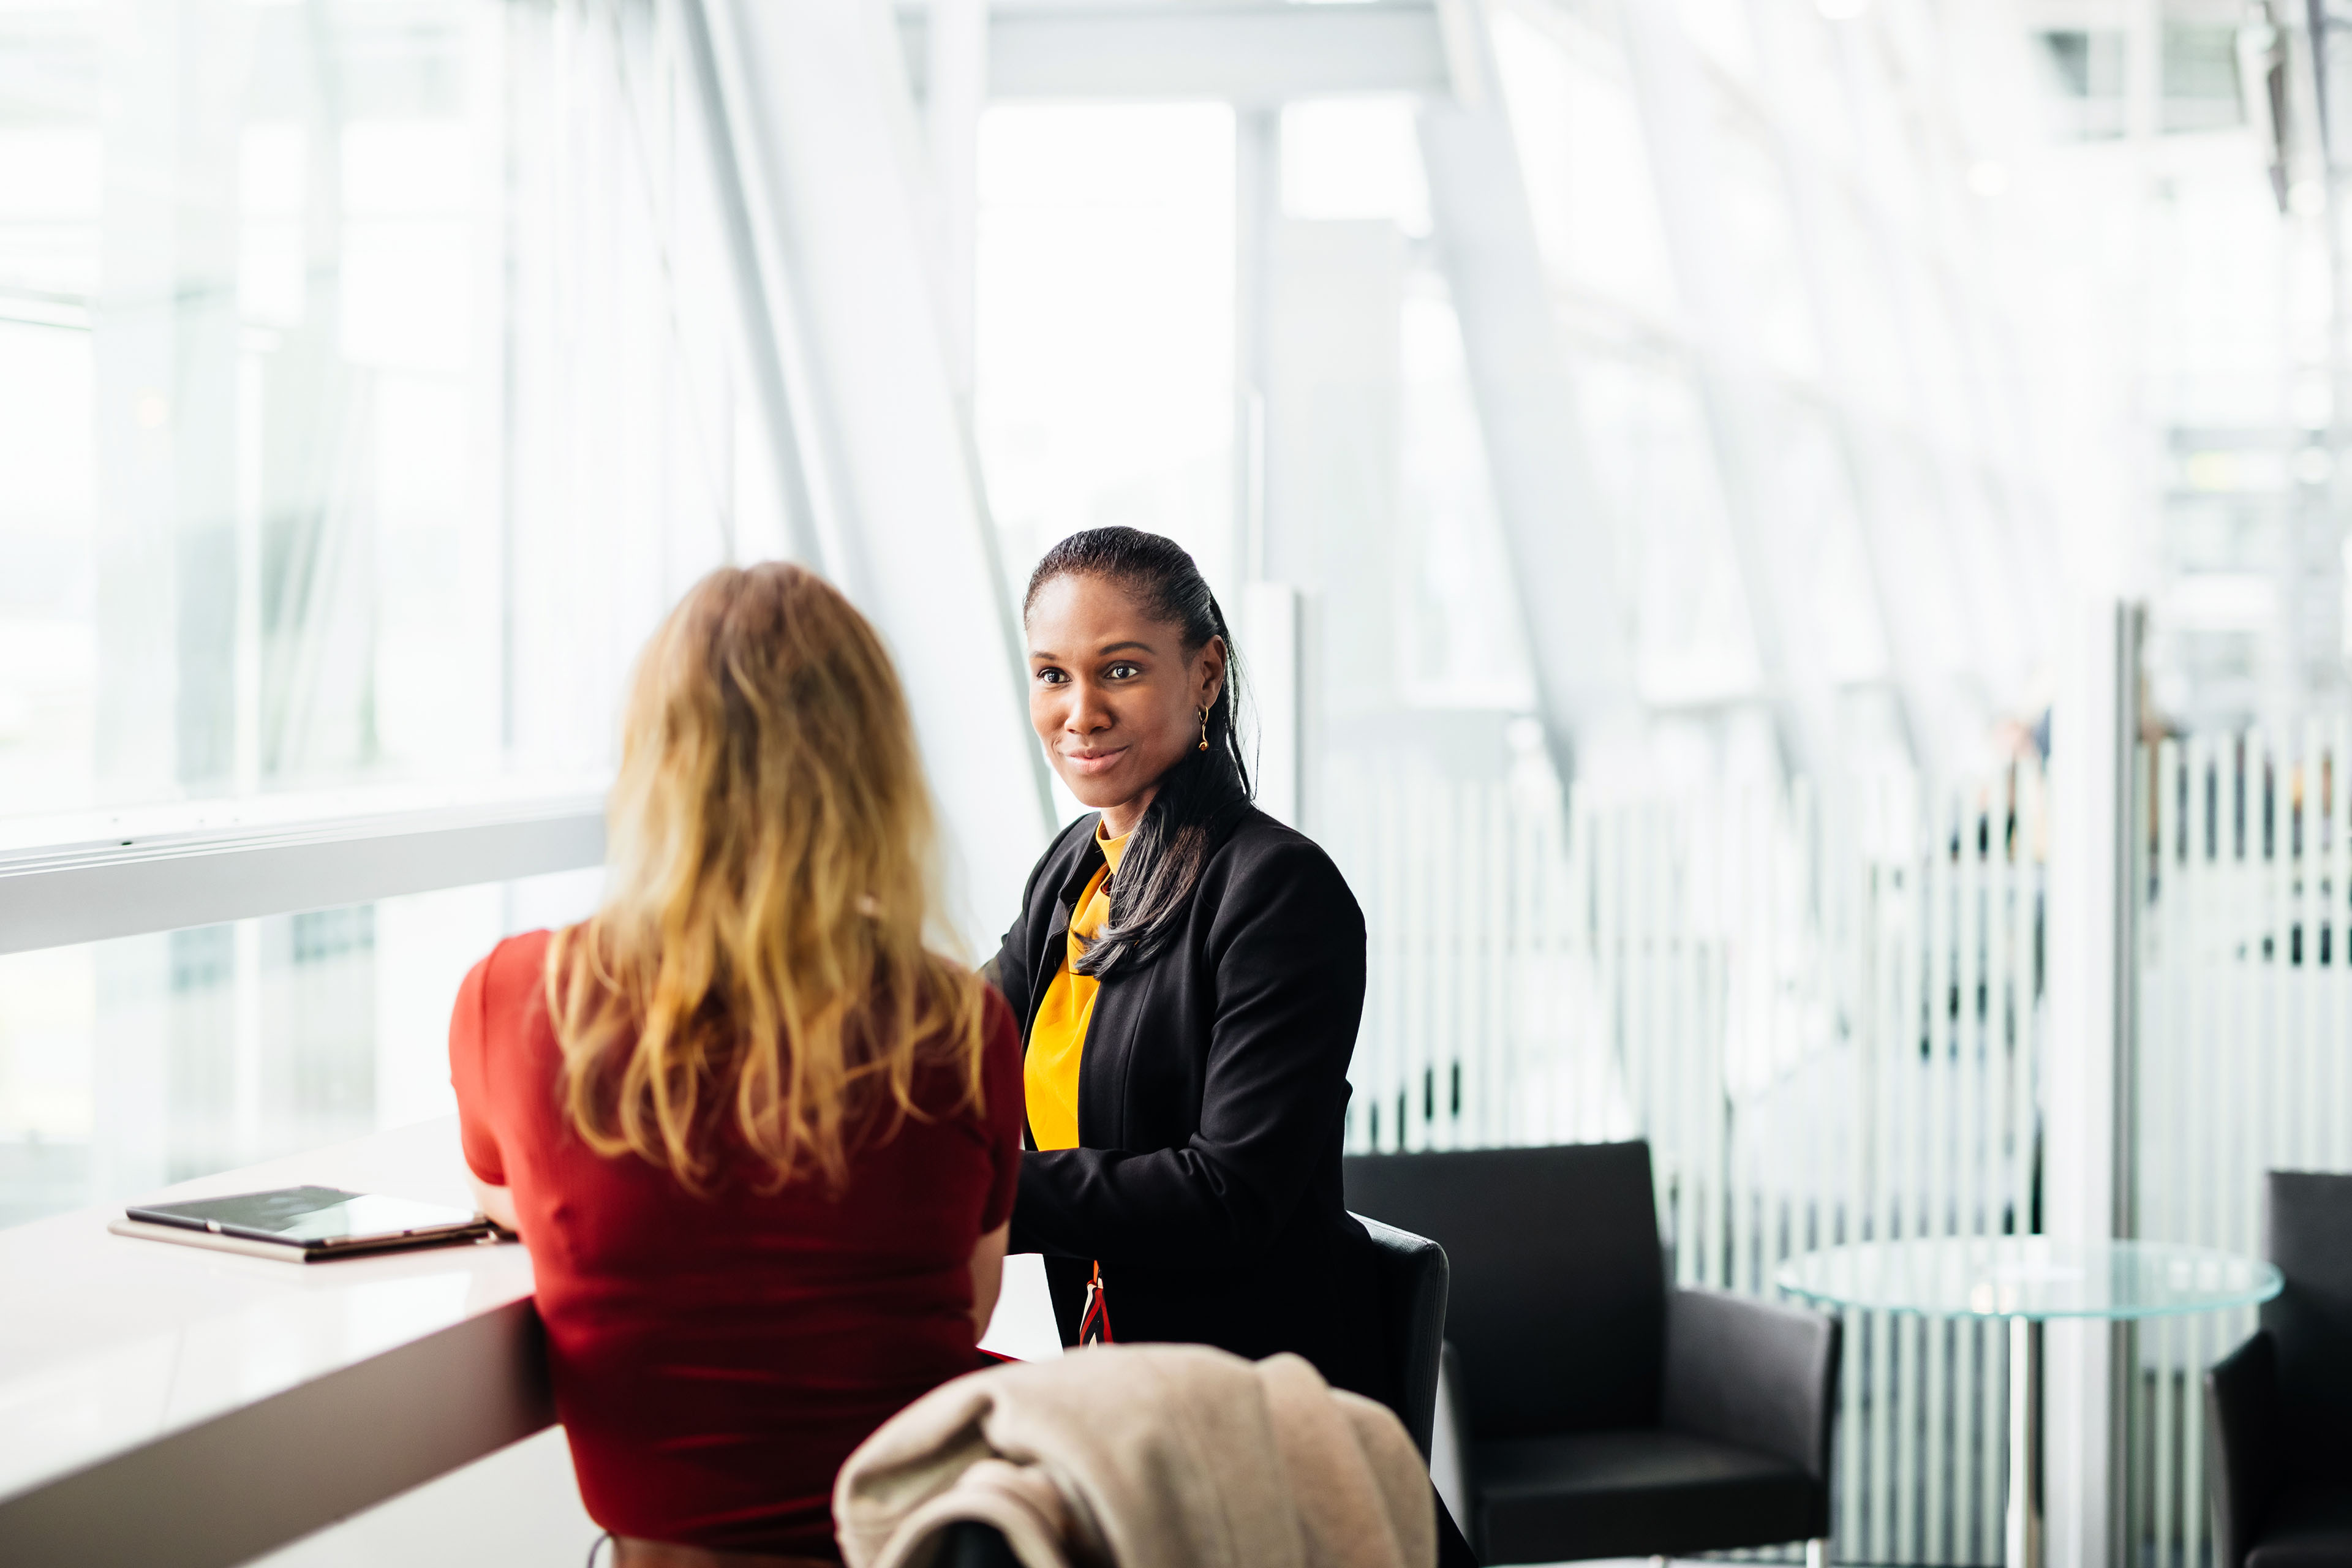 Evolving for enhanced employee experience and efficiency. Collaboration between teams from EY and Microsoft creates a glimpse into workforce mobility’s future.